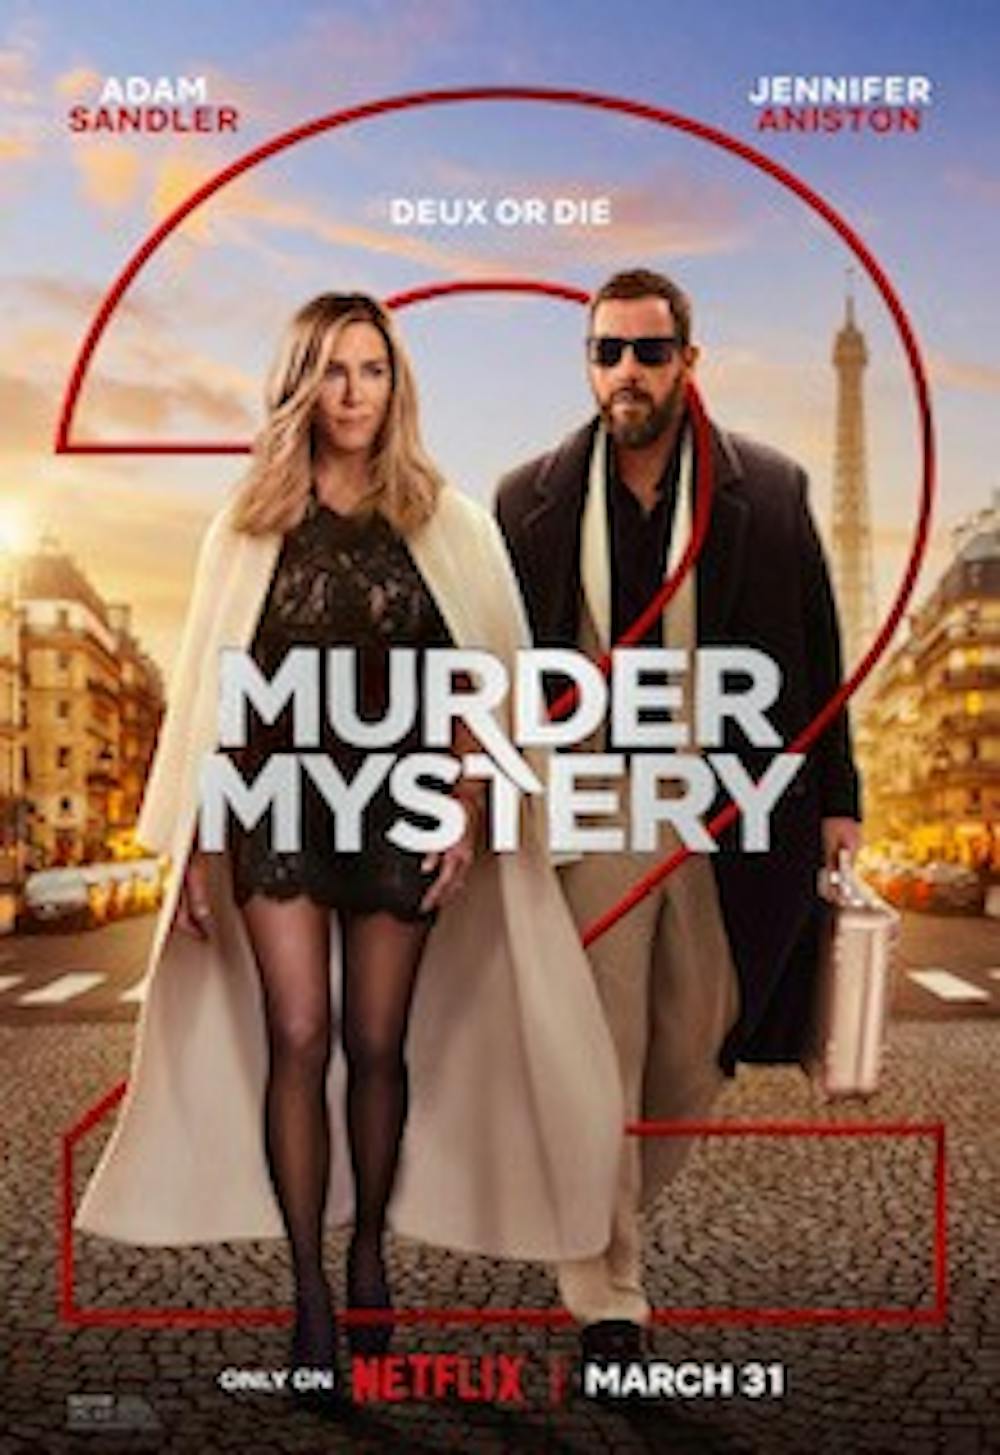 Review: 'Murder Mystery 2' sets itself up to be a comedic franchise